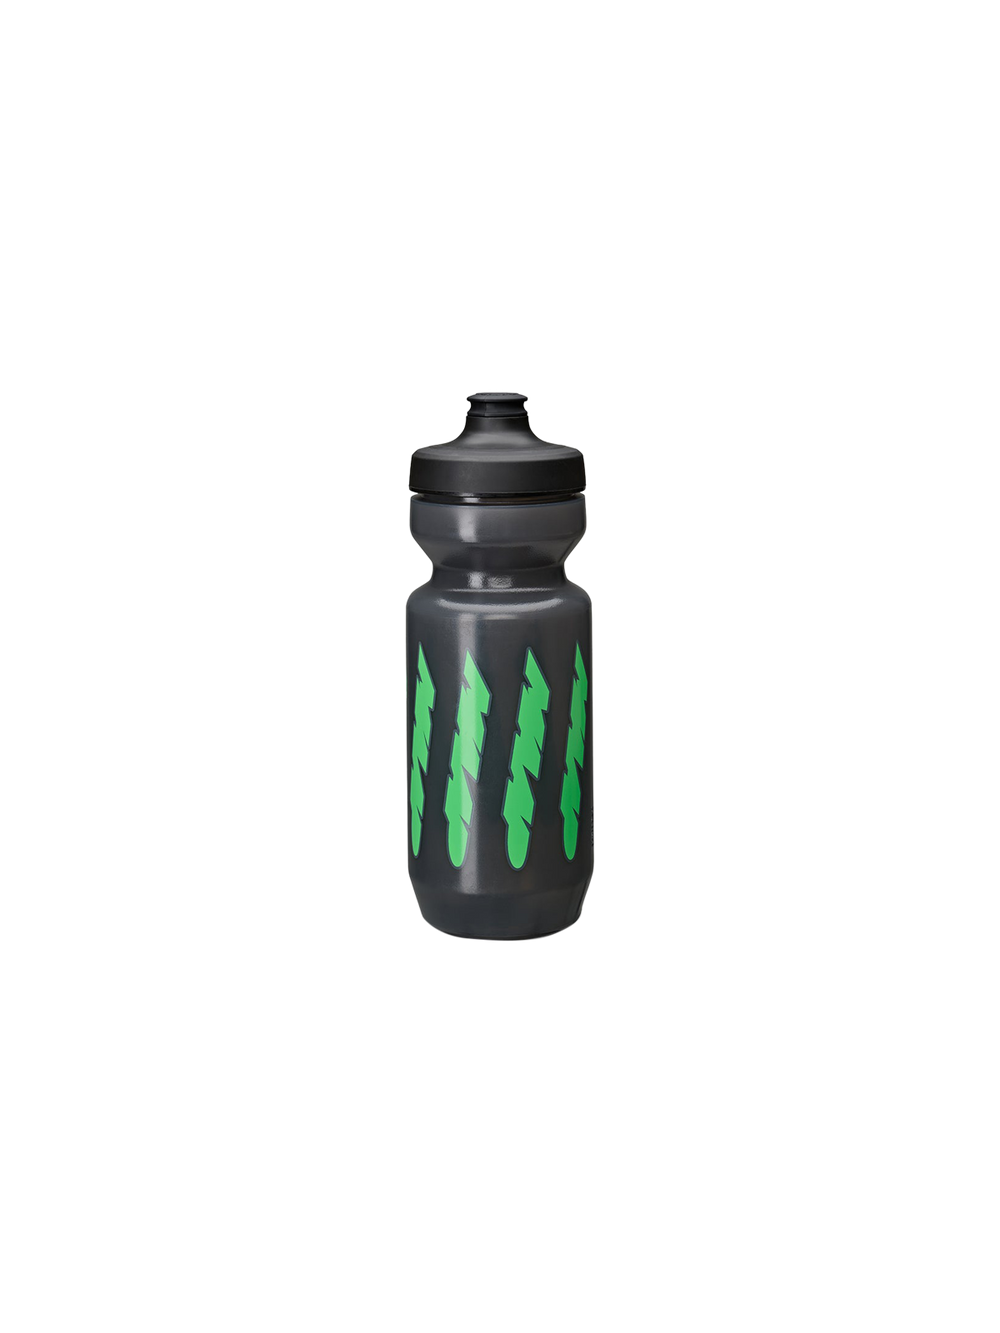 Product Image for Eclipse Bottle